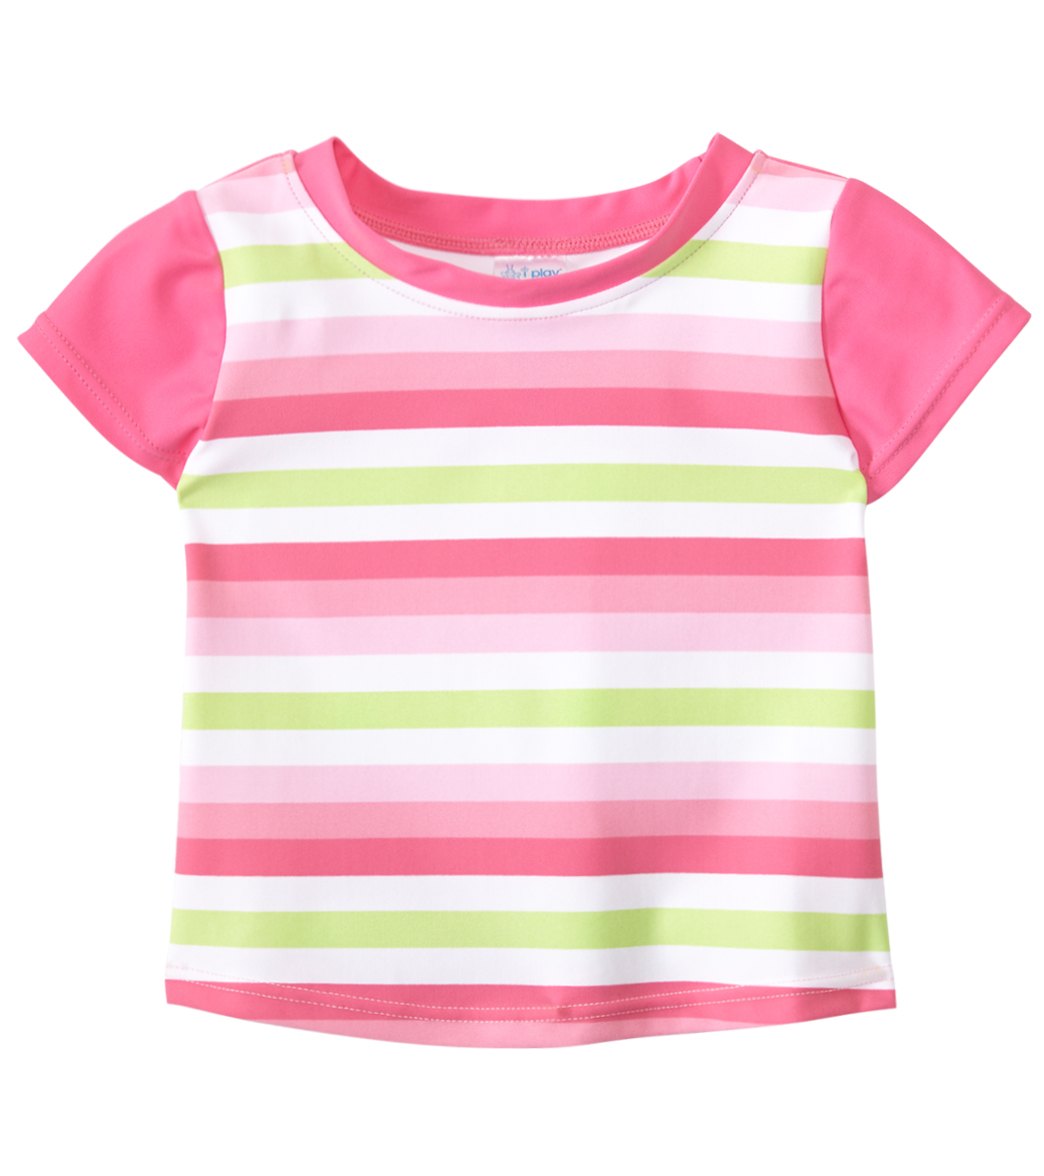 I Play. By Green Sprouts Girls' Classic Cap Sleeve Rashguard Baby - Pink Stripe 18 Months - Swimoutlet.com